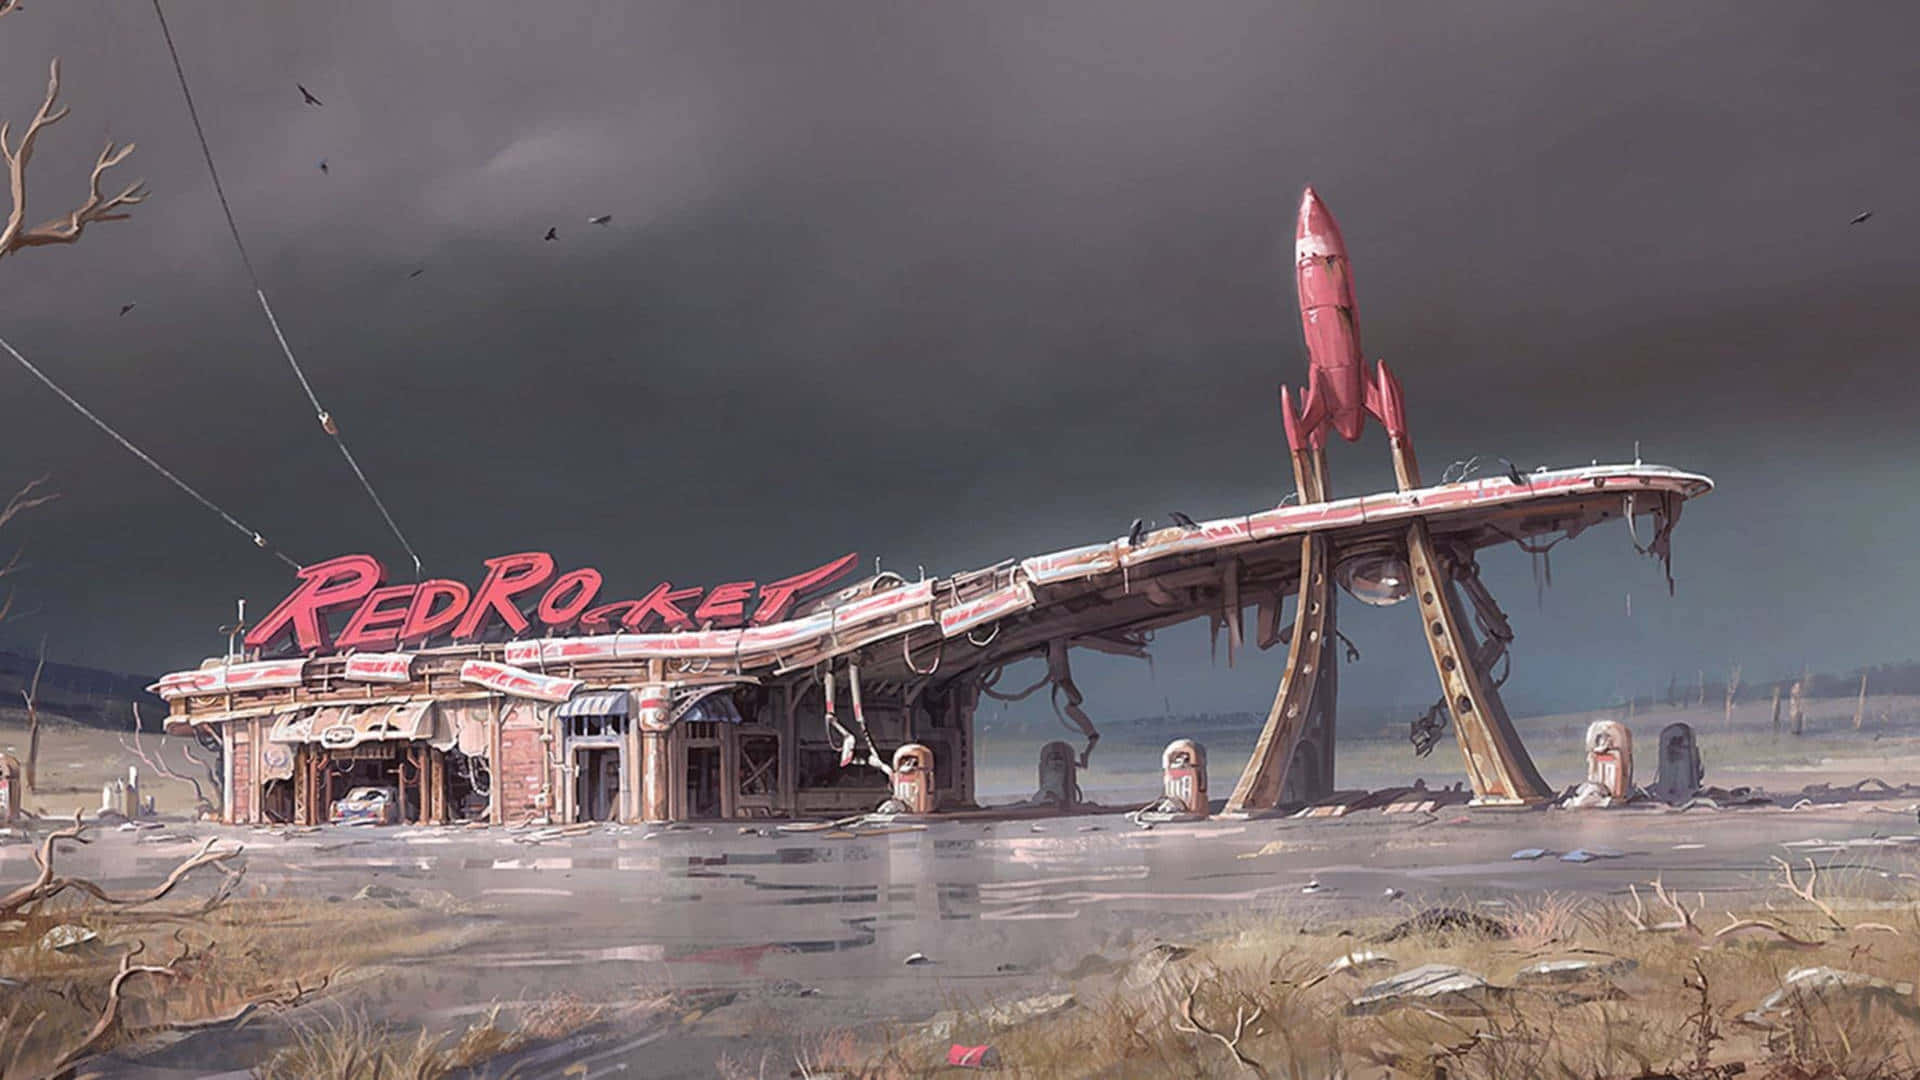 Discovering the Fallout 4 Wasteland: A Lone Survivor Traverses The Devastated Landscape Wallpaper